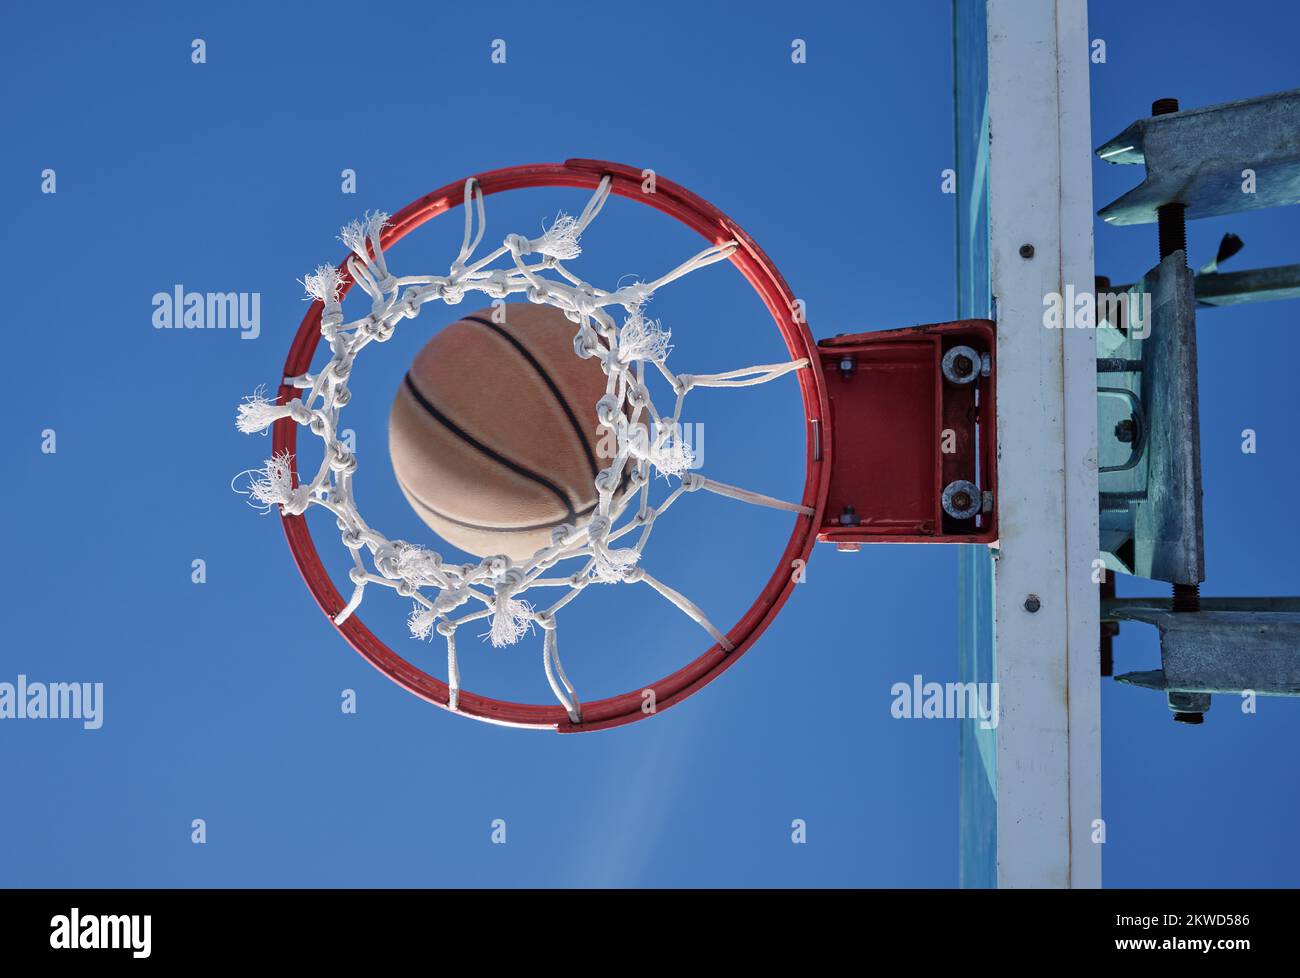 Basketball sports winner throwing, shooting hoops and slam dunk for points, score and performance during sports, competition and game match from below Stock Photo